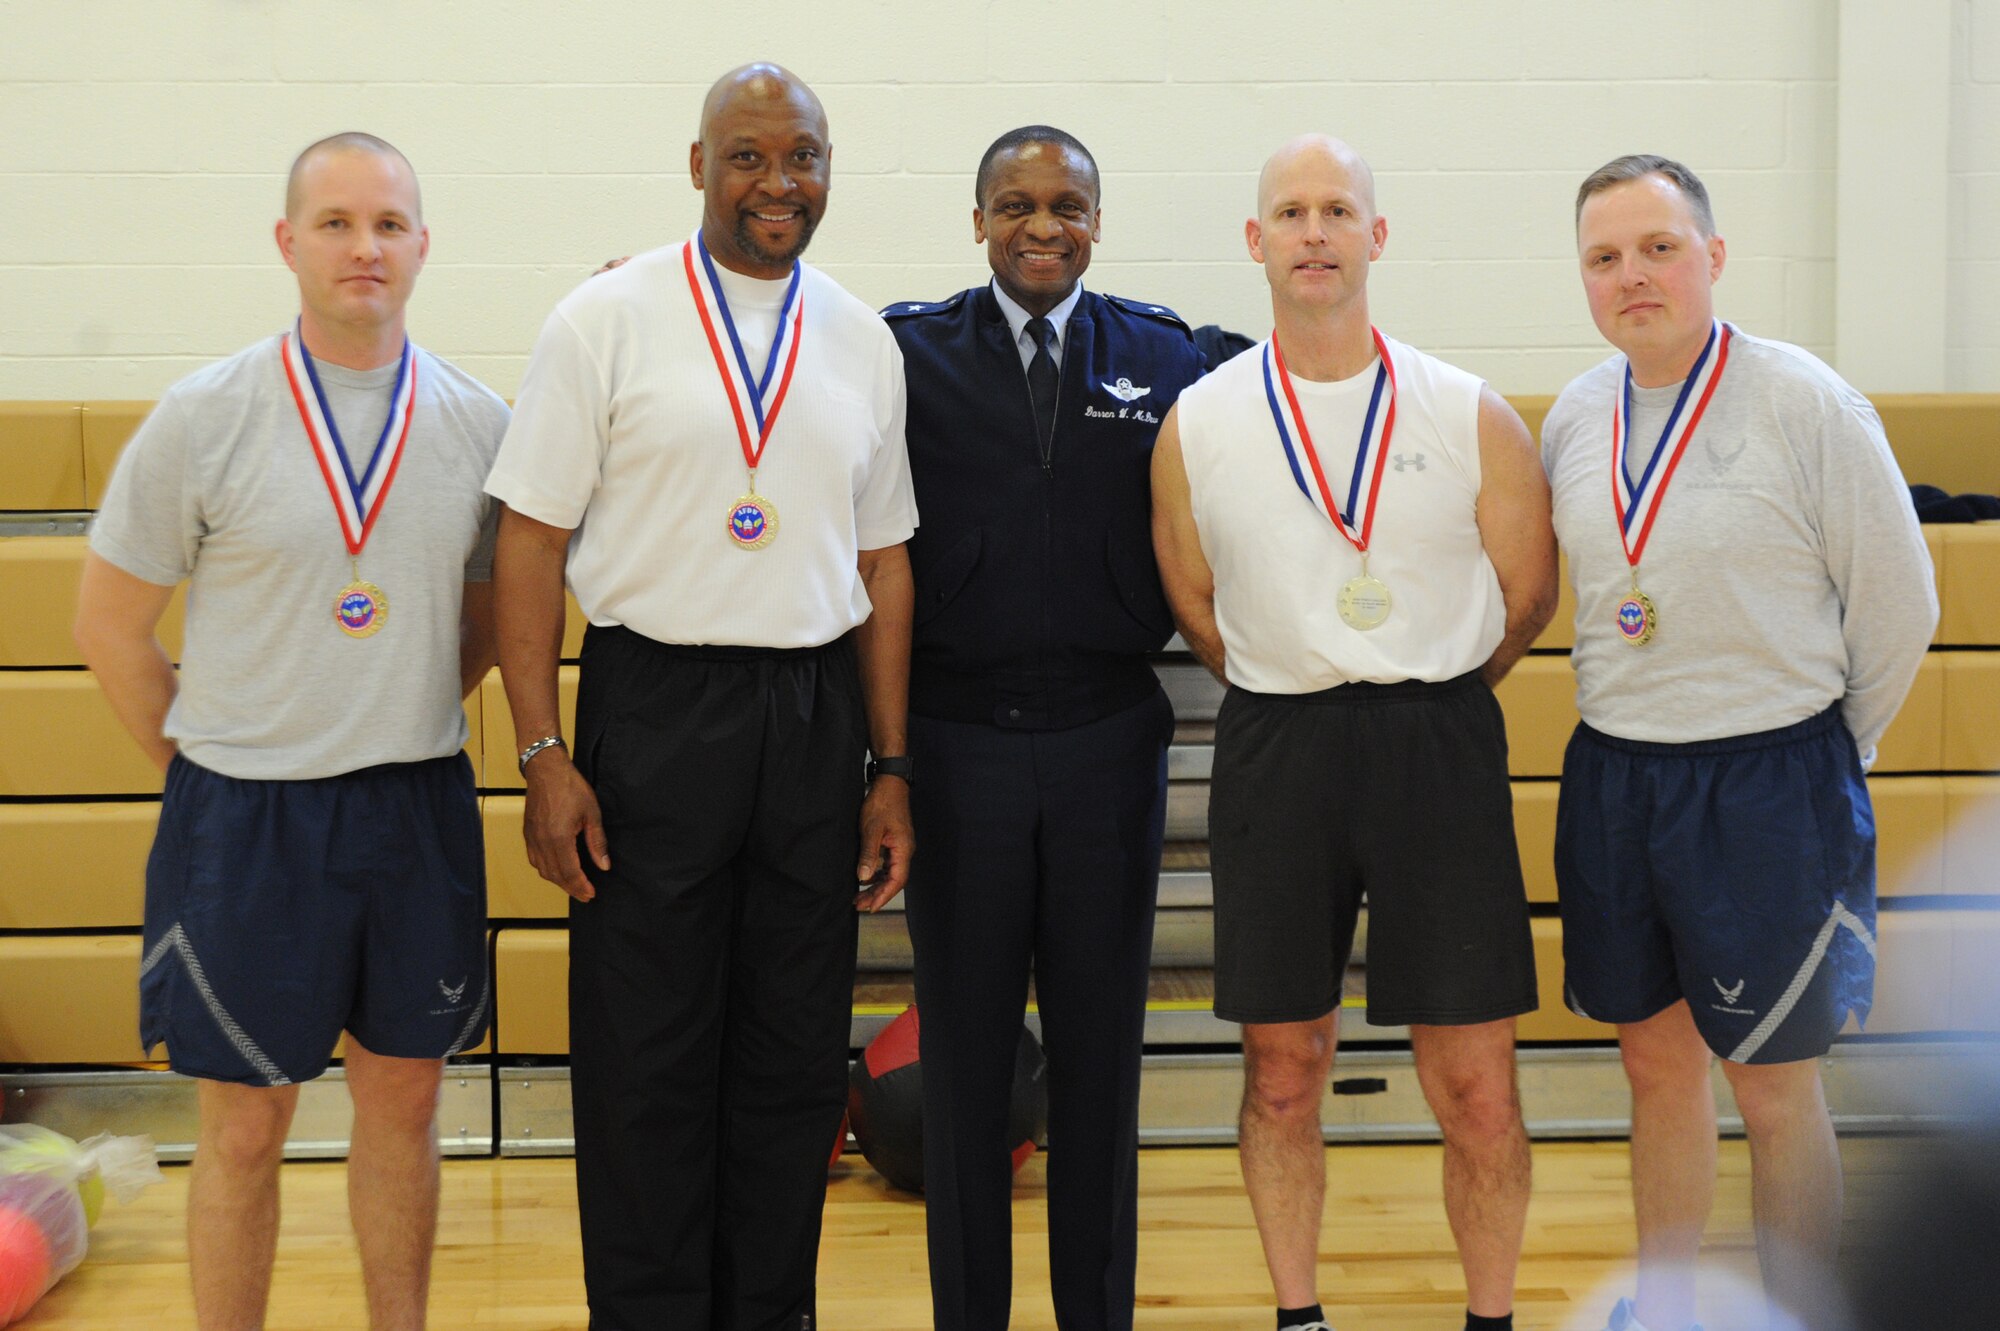 Air Force District of Washington Commander Maj. Gen. Darren W. McDew
congratulates Team Doom March 1 at the West Fitness Center, Joint Base
Andrews, Md. The team won the weight lifting category in the February
Fitness Challenge, lifting more than 3,060,230 pounds. (U.S. Air Force photo
by Airman 1st Class Tabitha N. Haynes)
